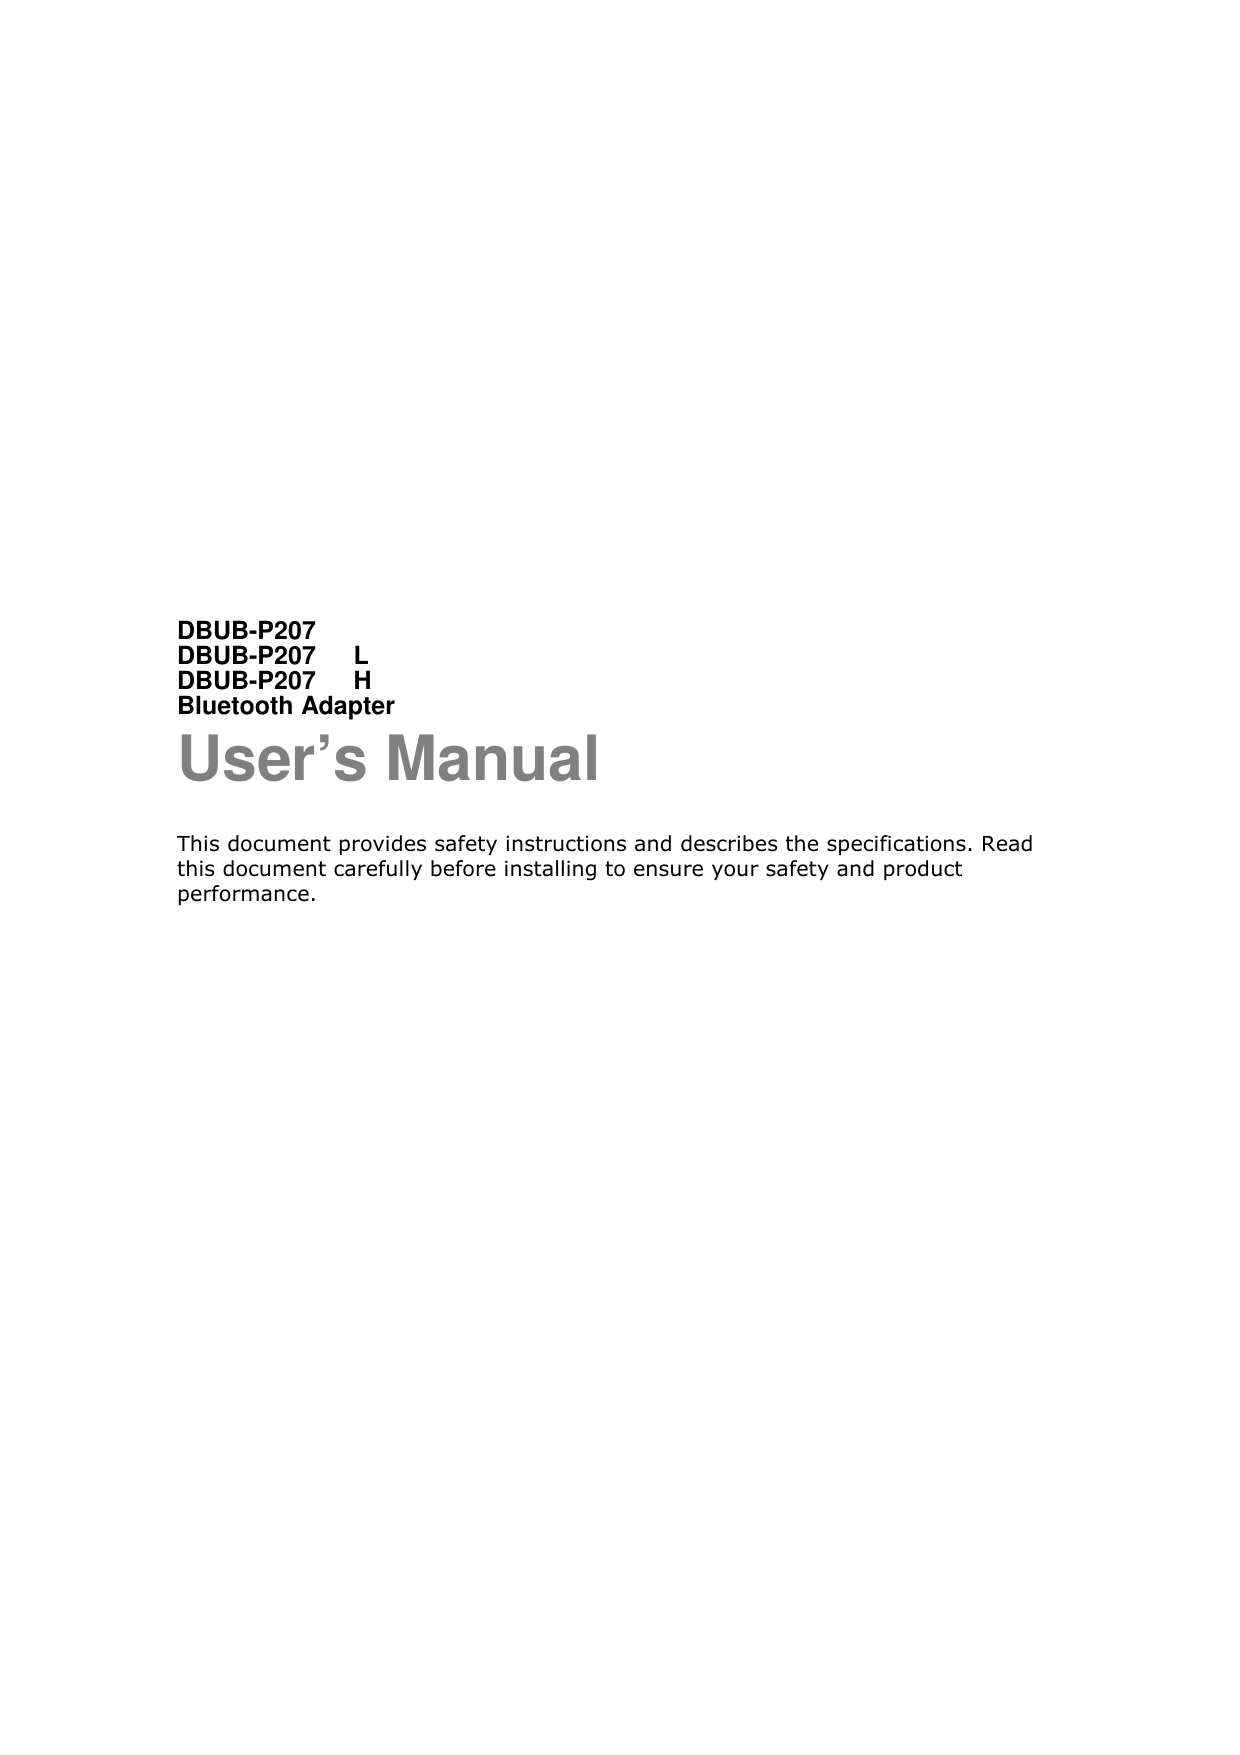            DBUB-P207   DBUB-P207      L     DBUB-P207      H Bluetooth Adapter User’s Manual This document provides safety instructions and describes the specifications. Read this document carefully before installing to ensure your safety and product performance.    